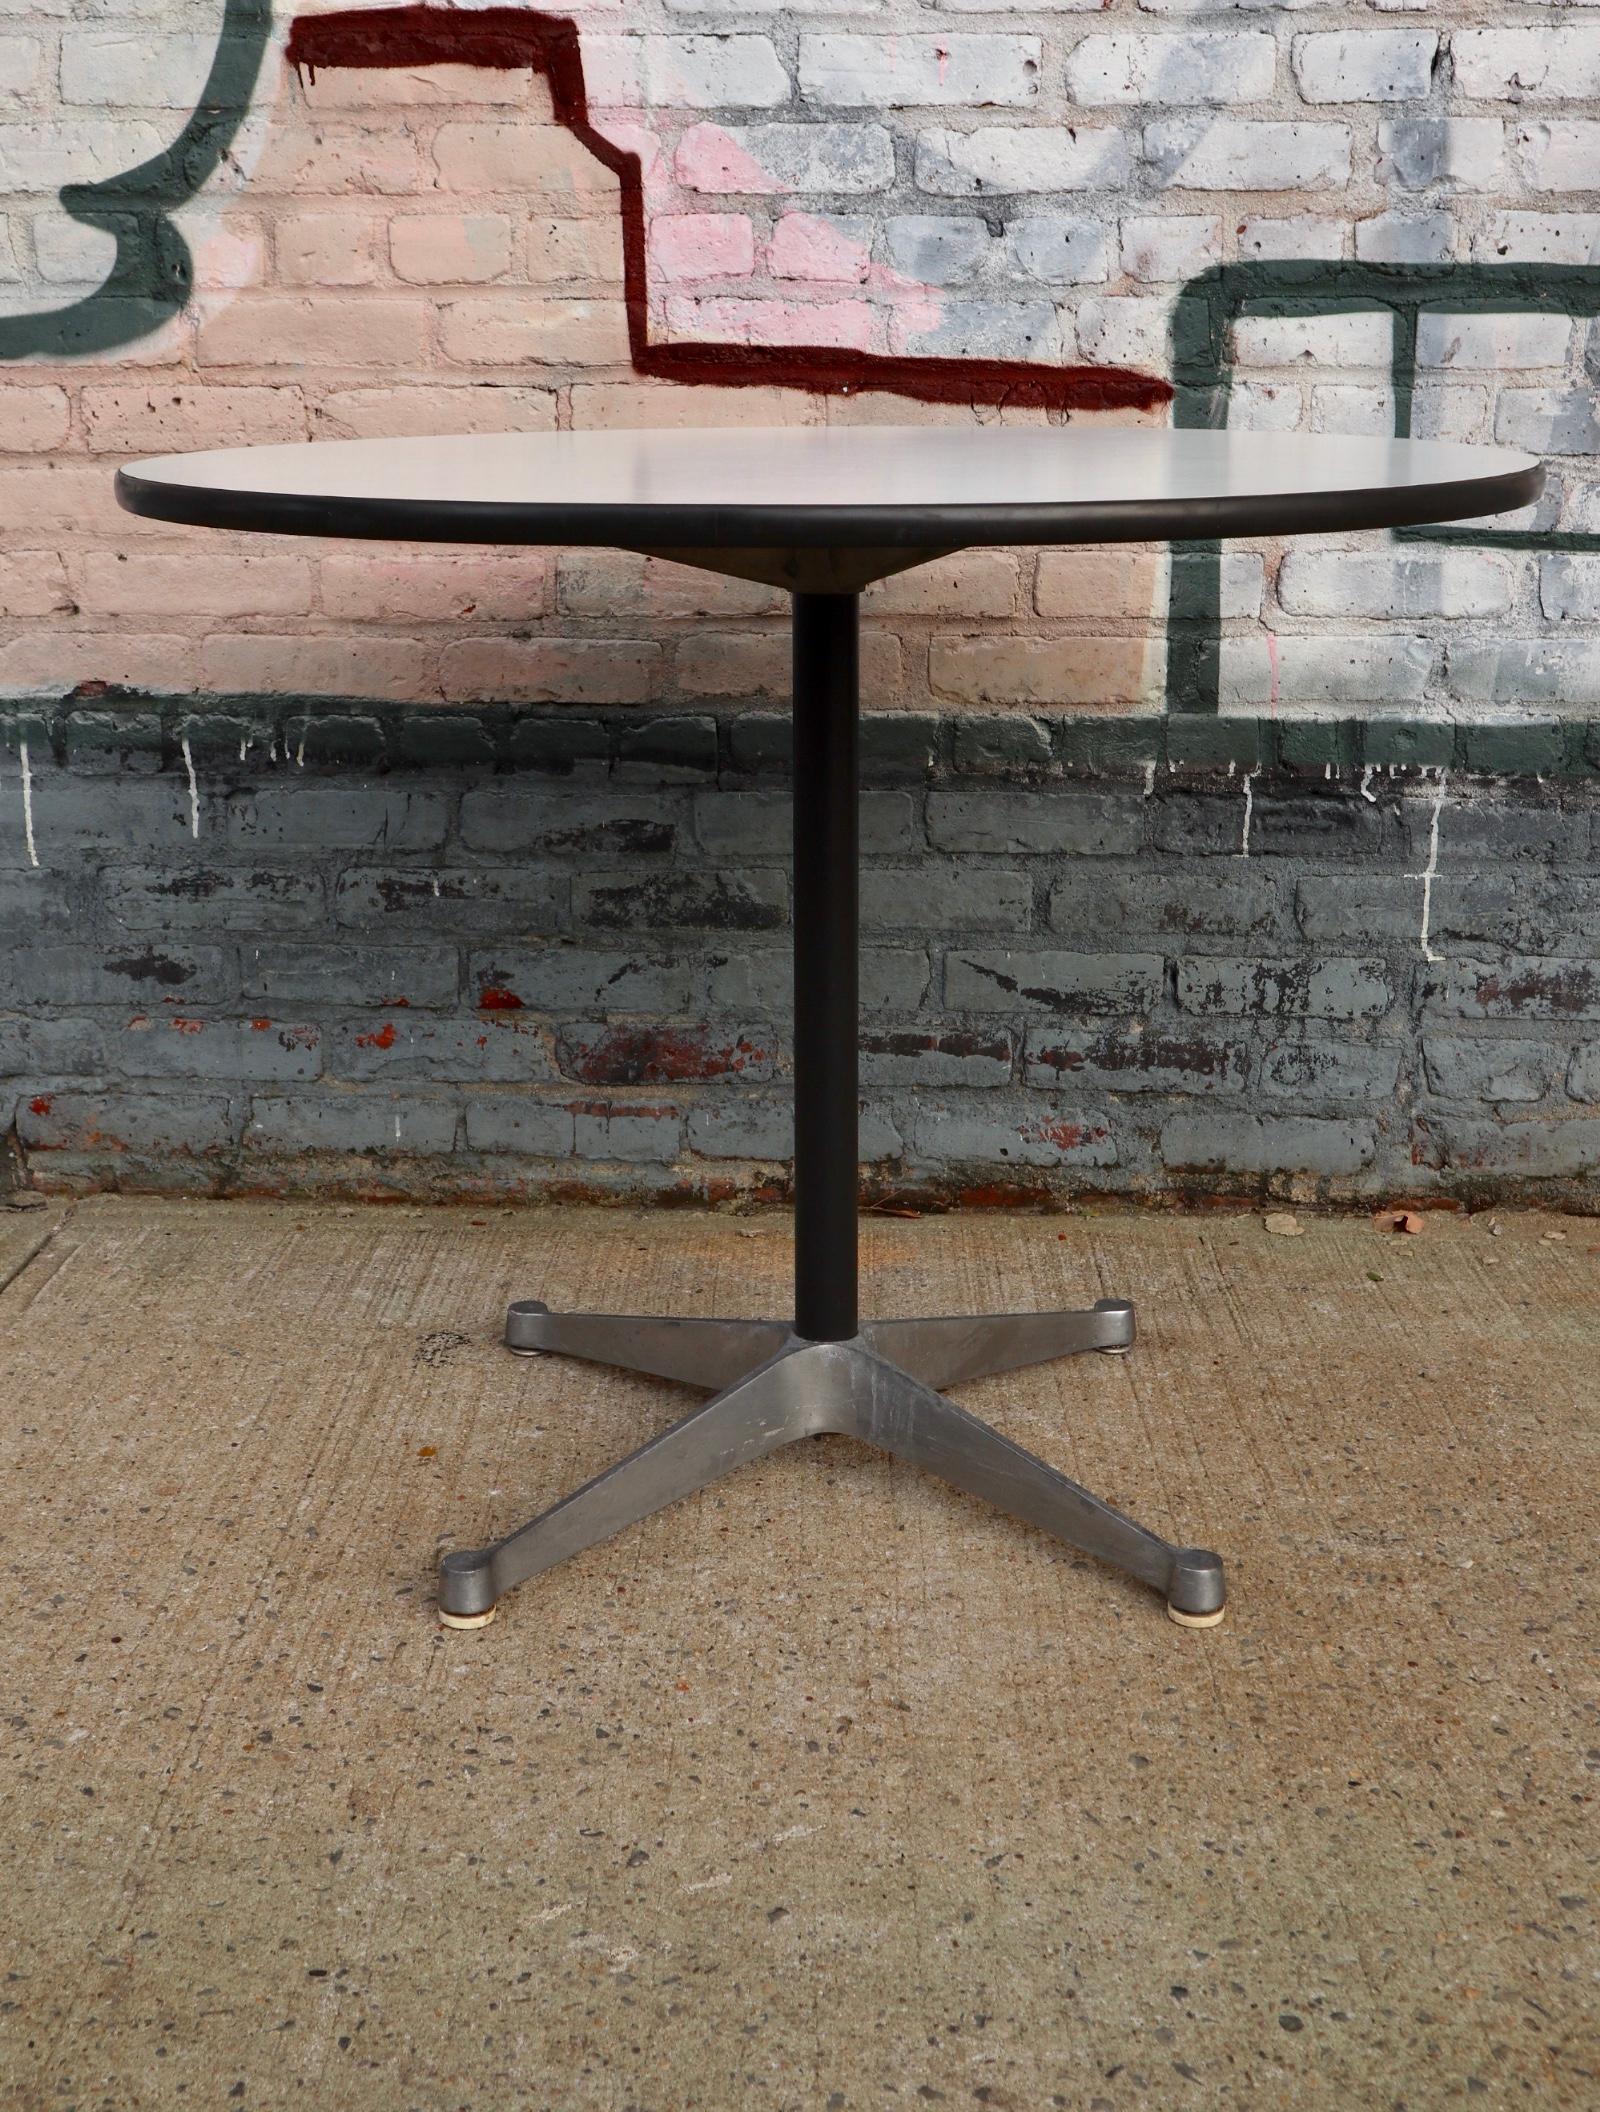 1970s era Herman Miller Eames circular dining table. Measures: 36 inches in diameter. Fits up to 4 chairs.